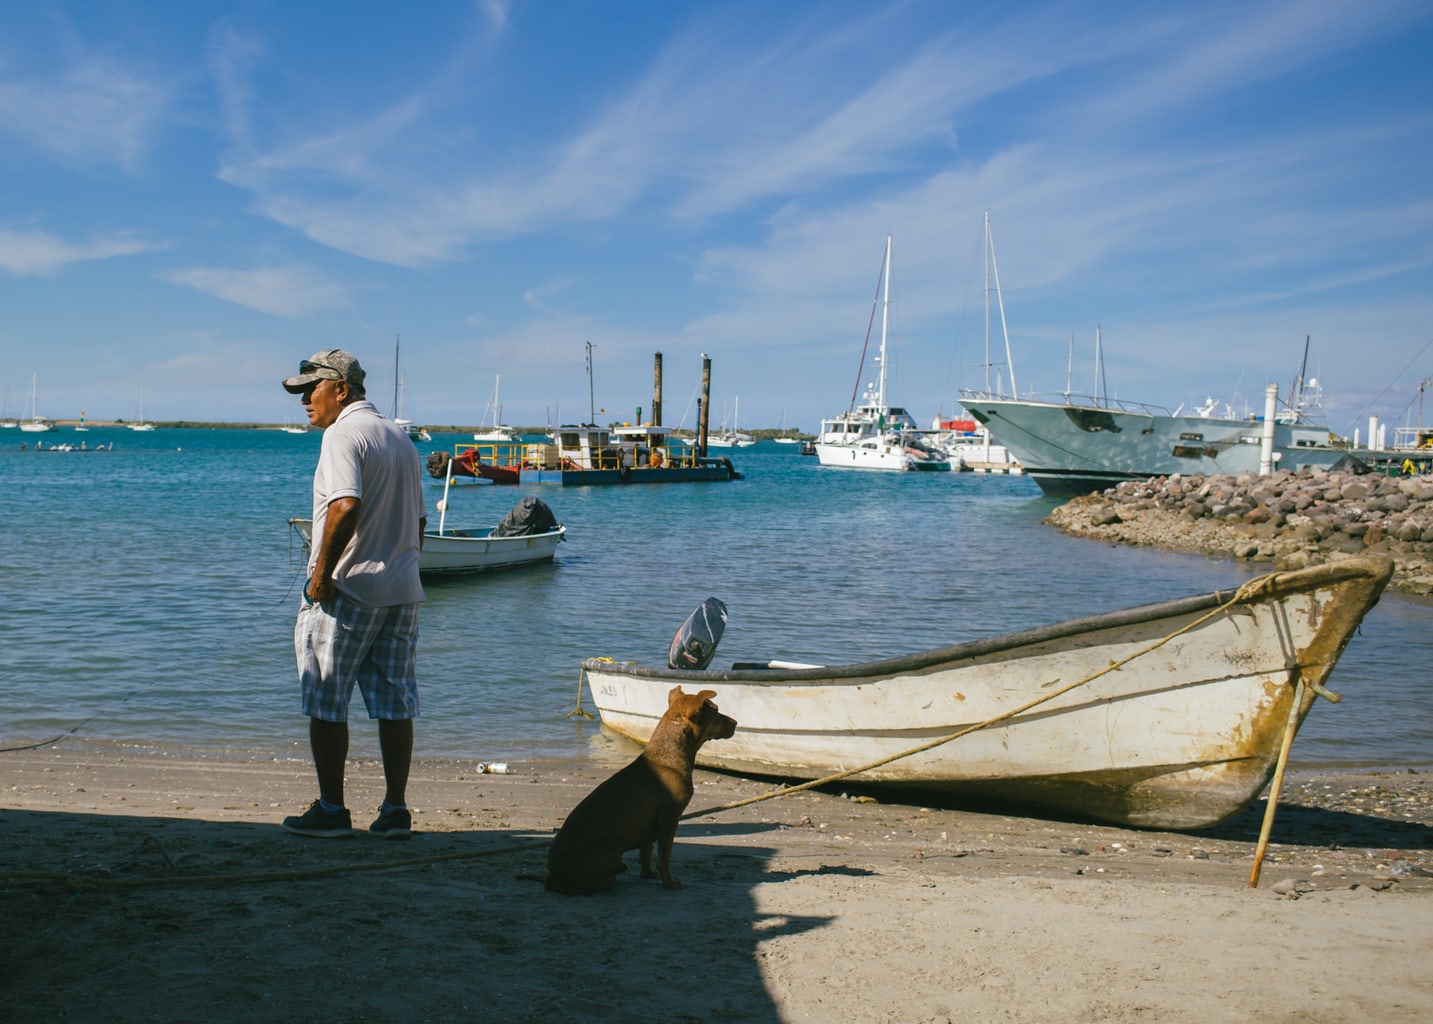 2021 Best Photos: A fisherman and dog on the beach in La Paz, Mexico